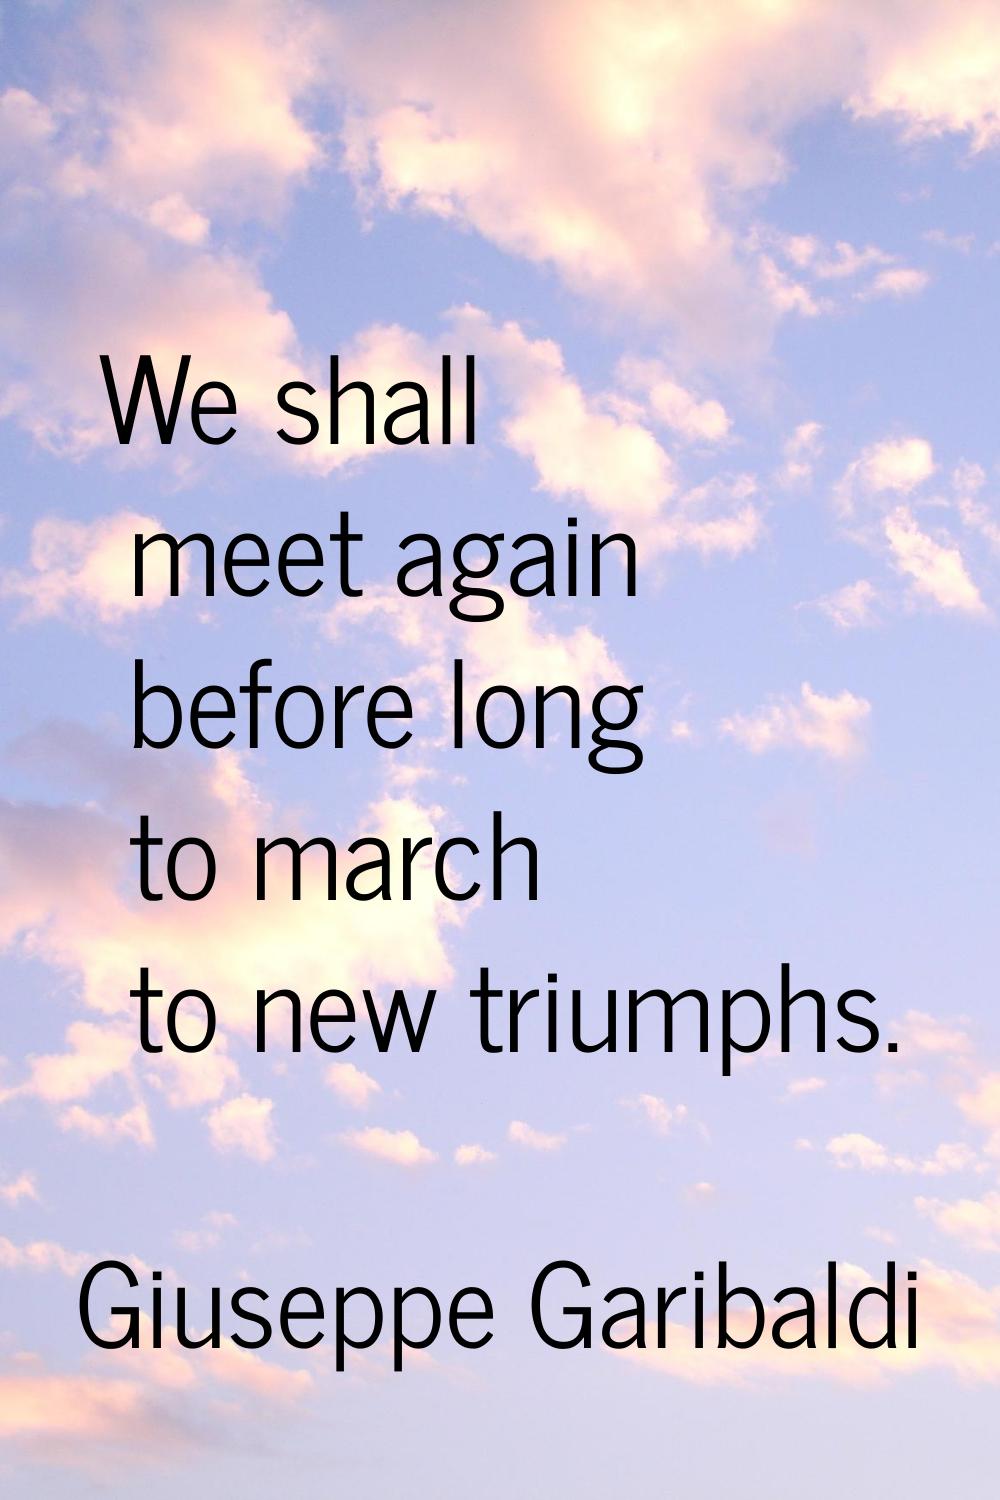 We shall meet again before long to march to new triumphs.